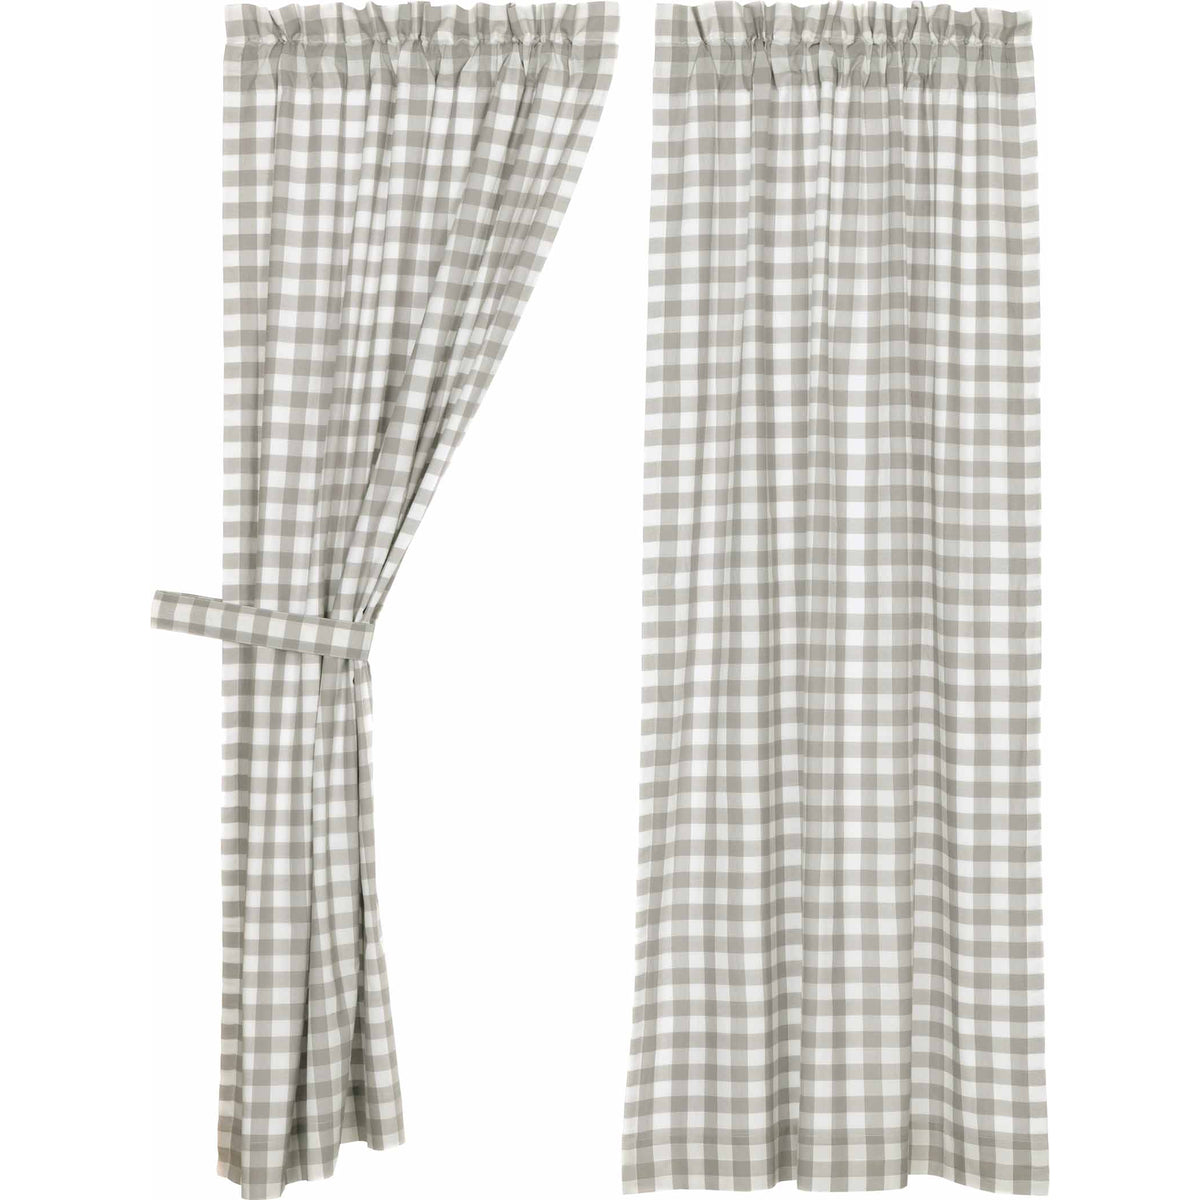 April & Olive Annie Buffalo Grey Check Short Panel Set of 2 63x36 By VHC Brands